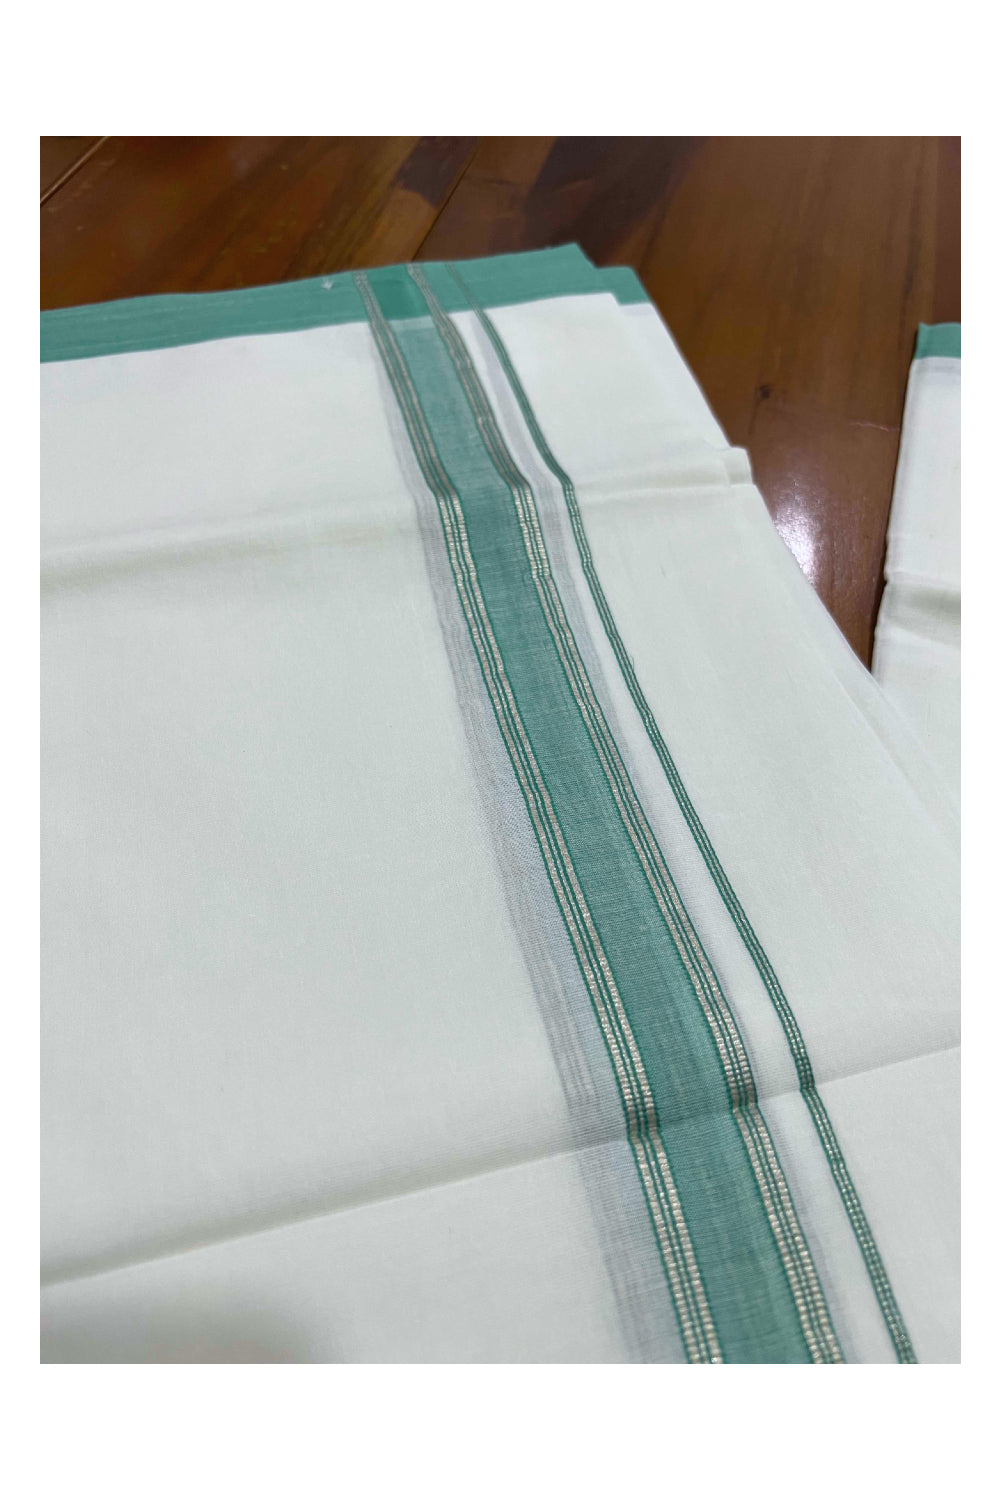 Pure White Cotton Mundu with Green and Silver Kara (South Indian Dhoti)